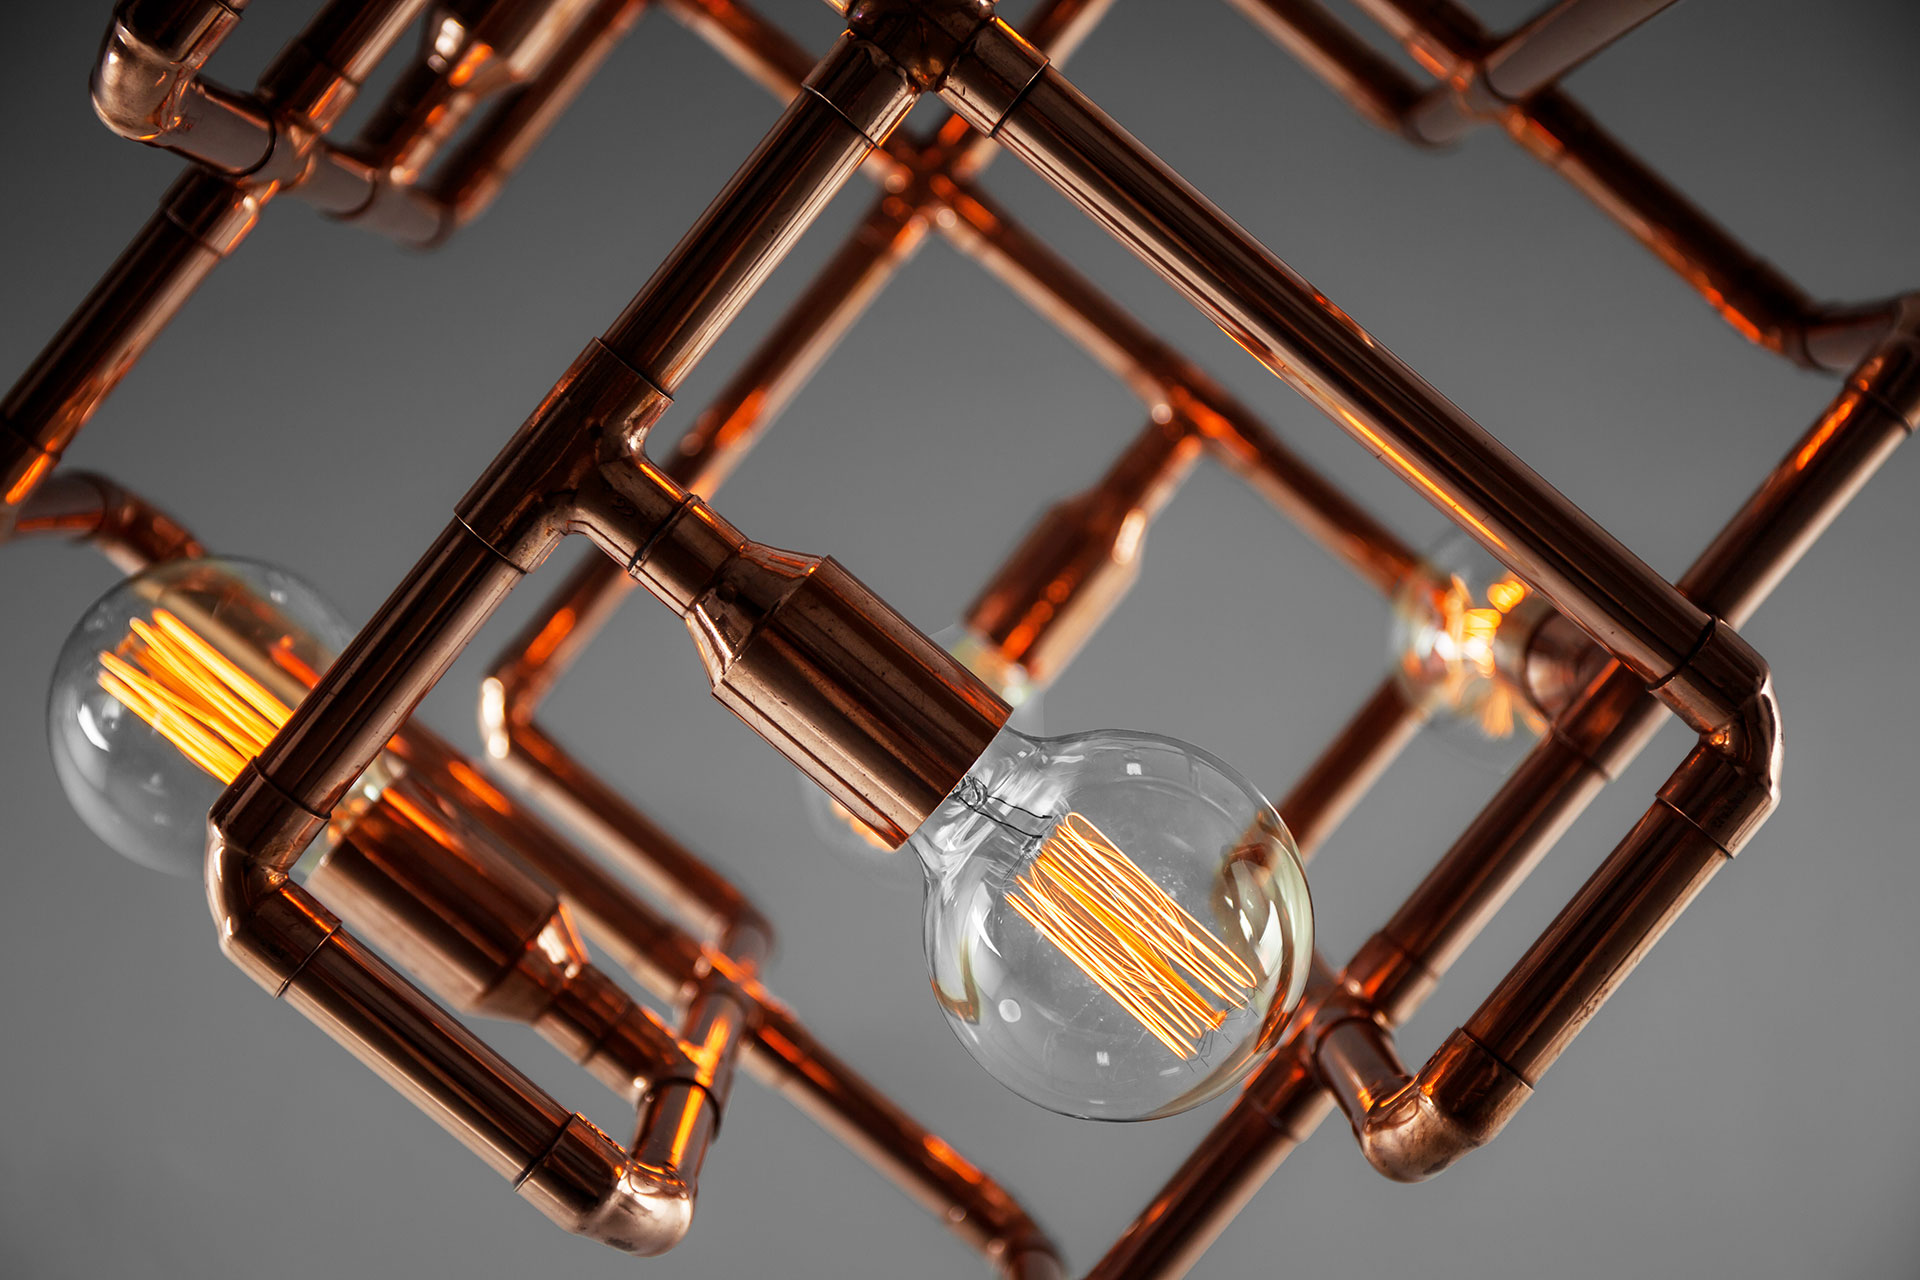 Copper pipe art ceiling lamp with vintage Edison bulbs